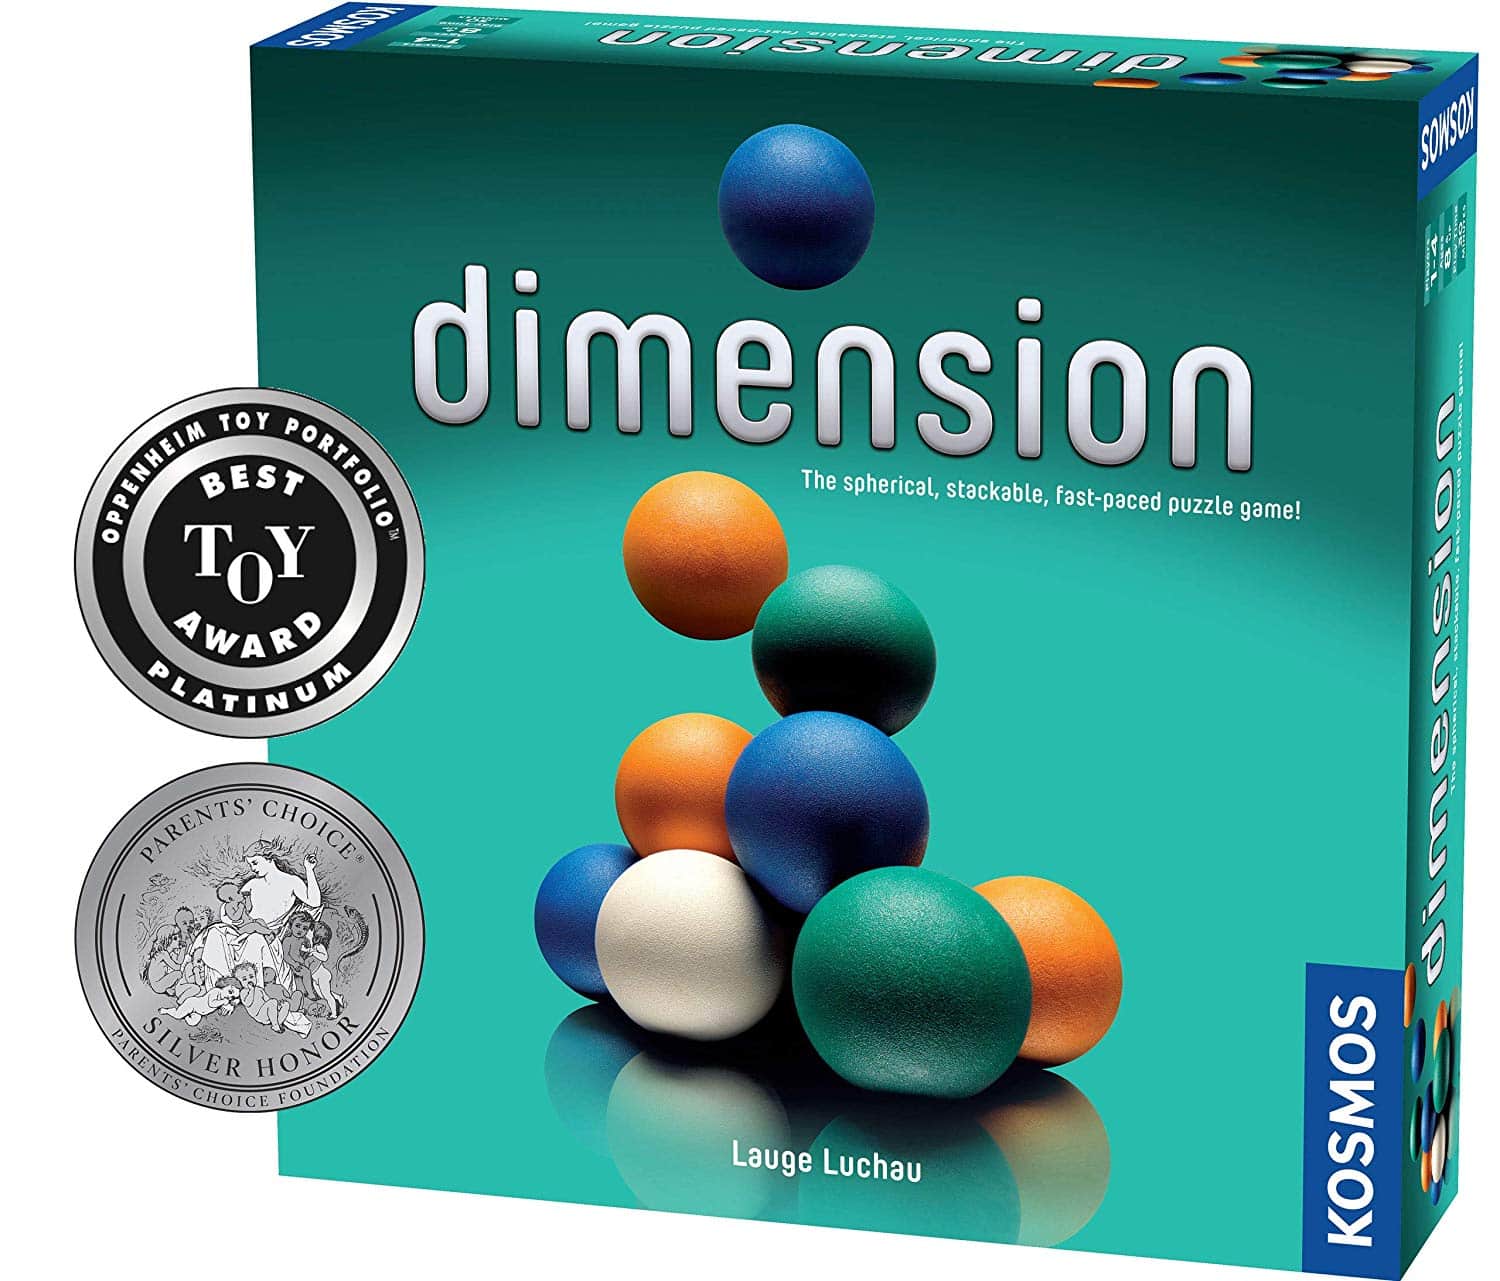 DEAL ALERT: Dimension 3D Strategy Game 4.6 Stars and 50% off!